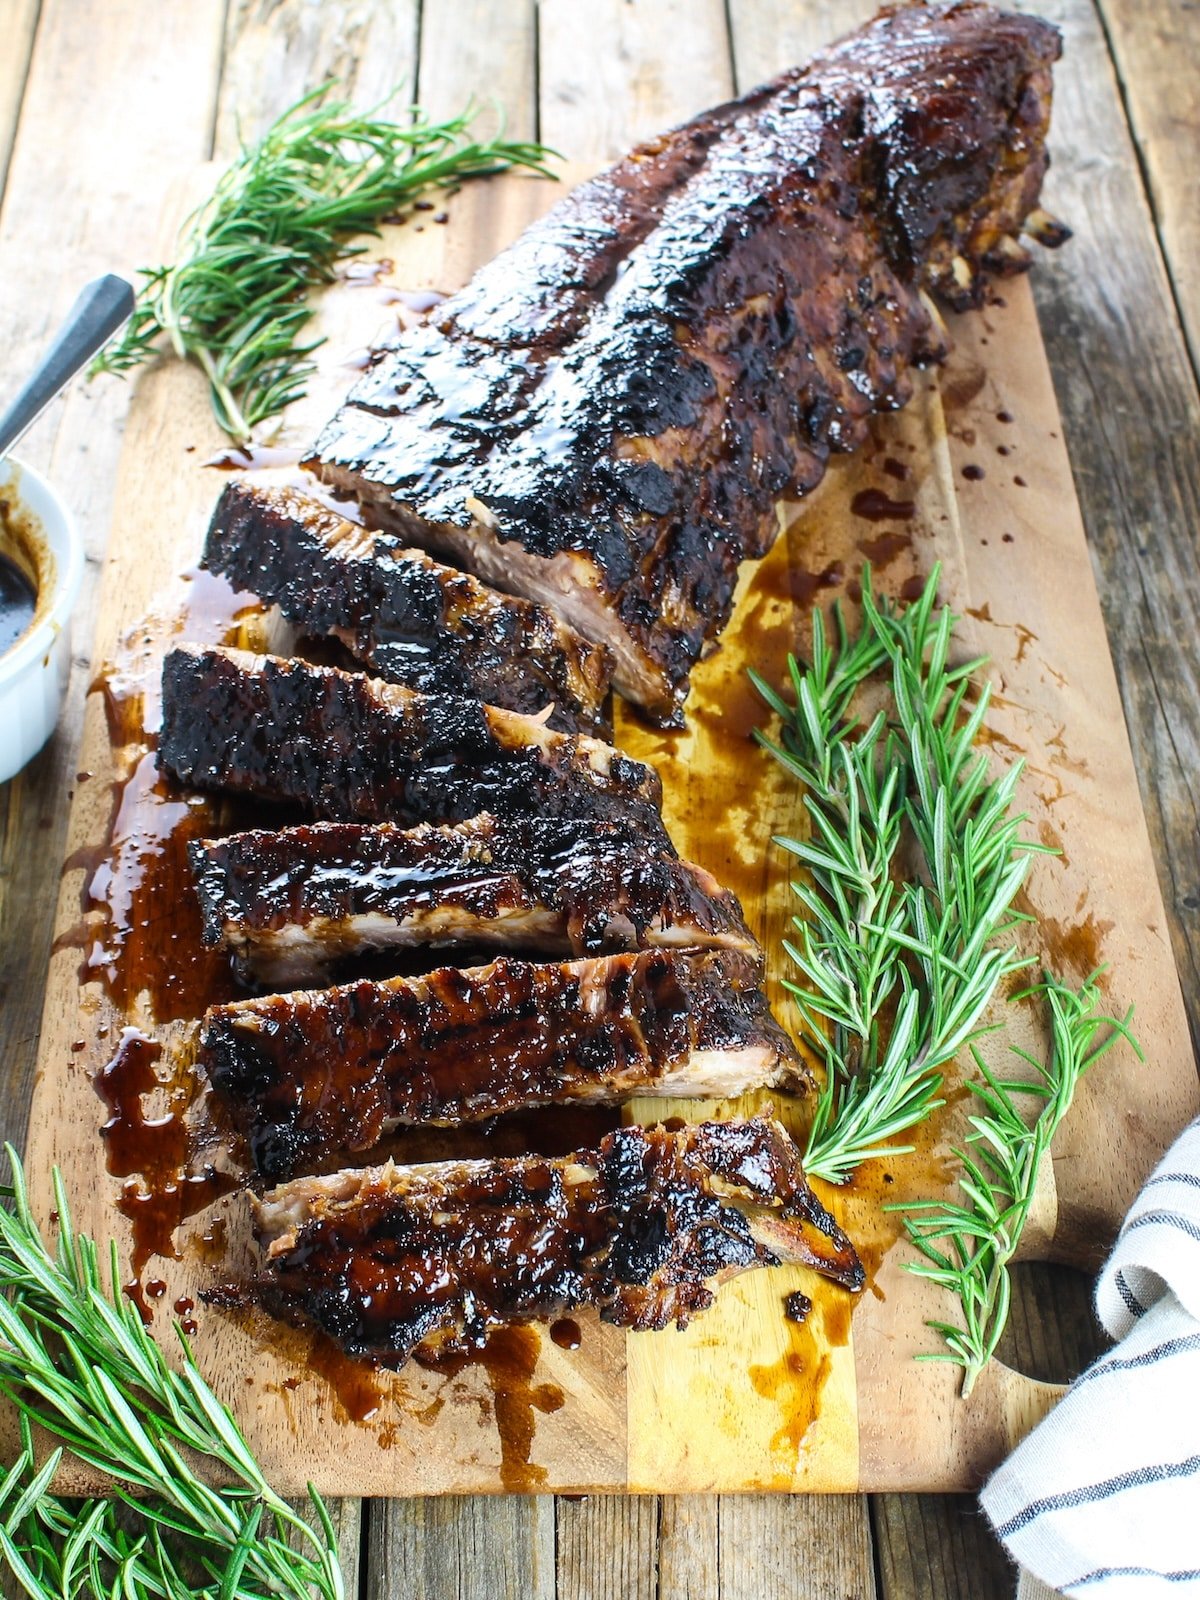 Balsamic Baby Back Ribs on a cutting board - a tasty cookout menu recipe.